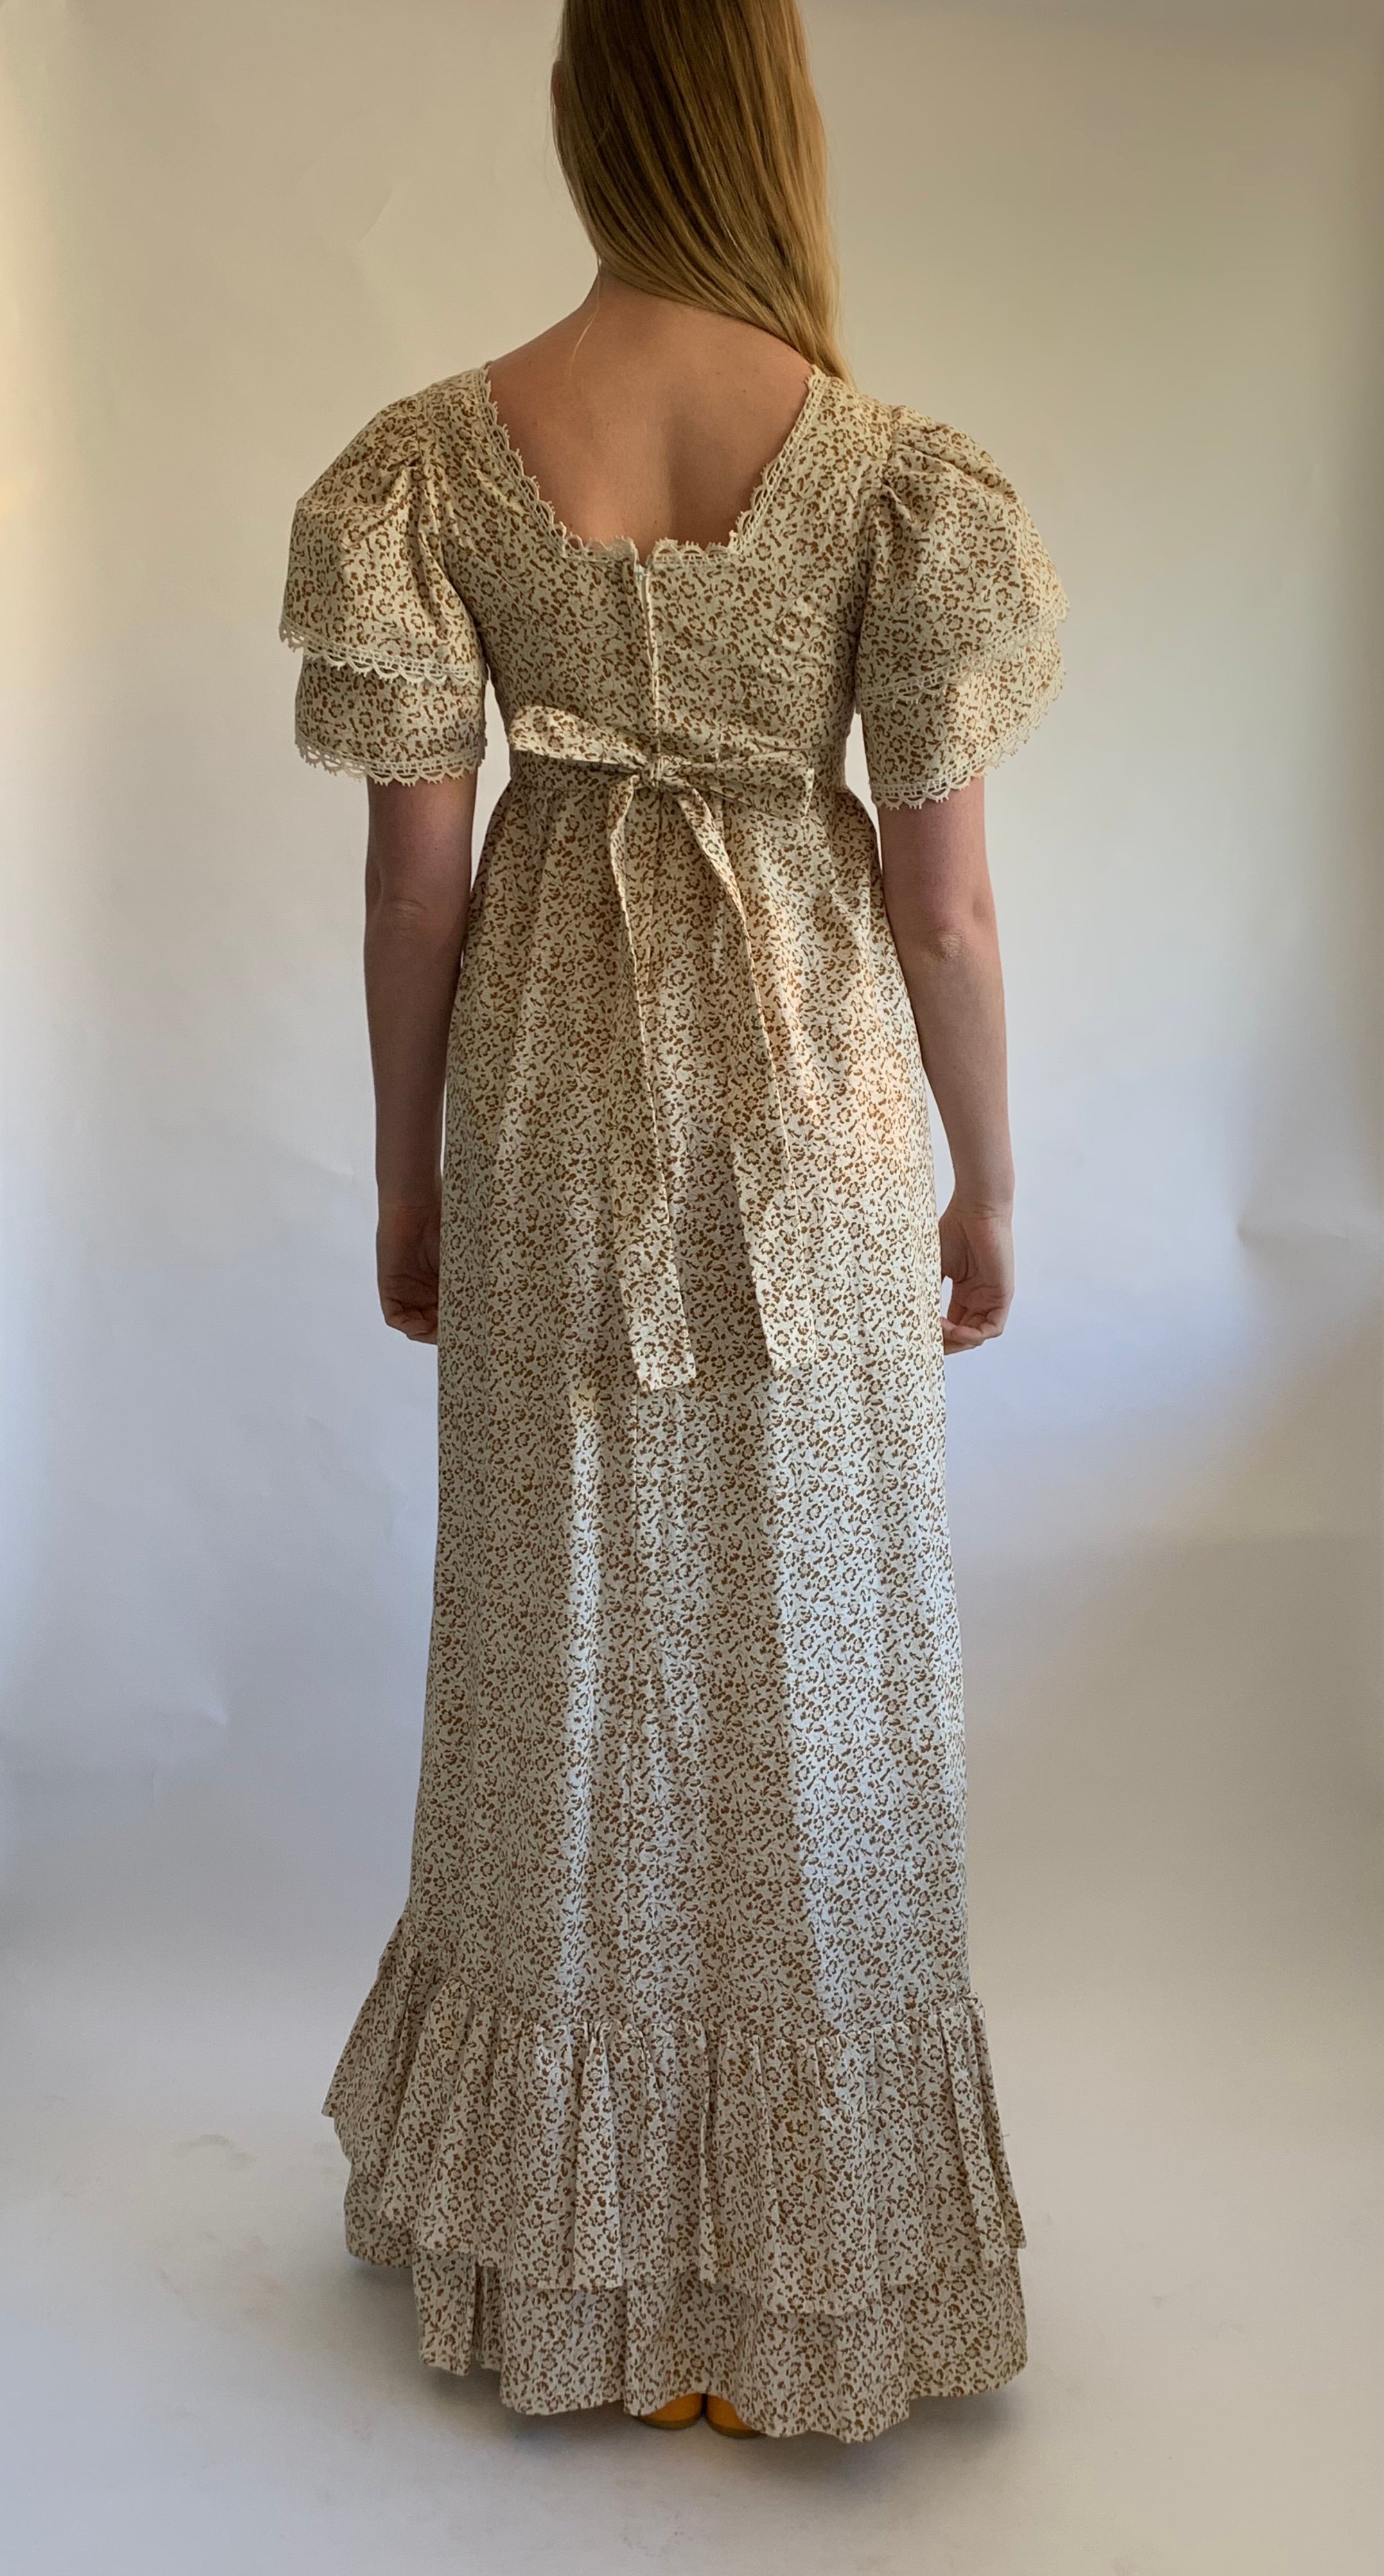 Laura Ashley Cream and Brown Floral Print Dress